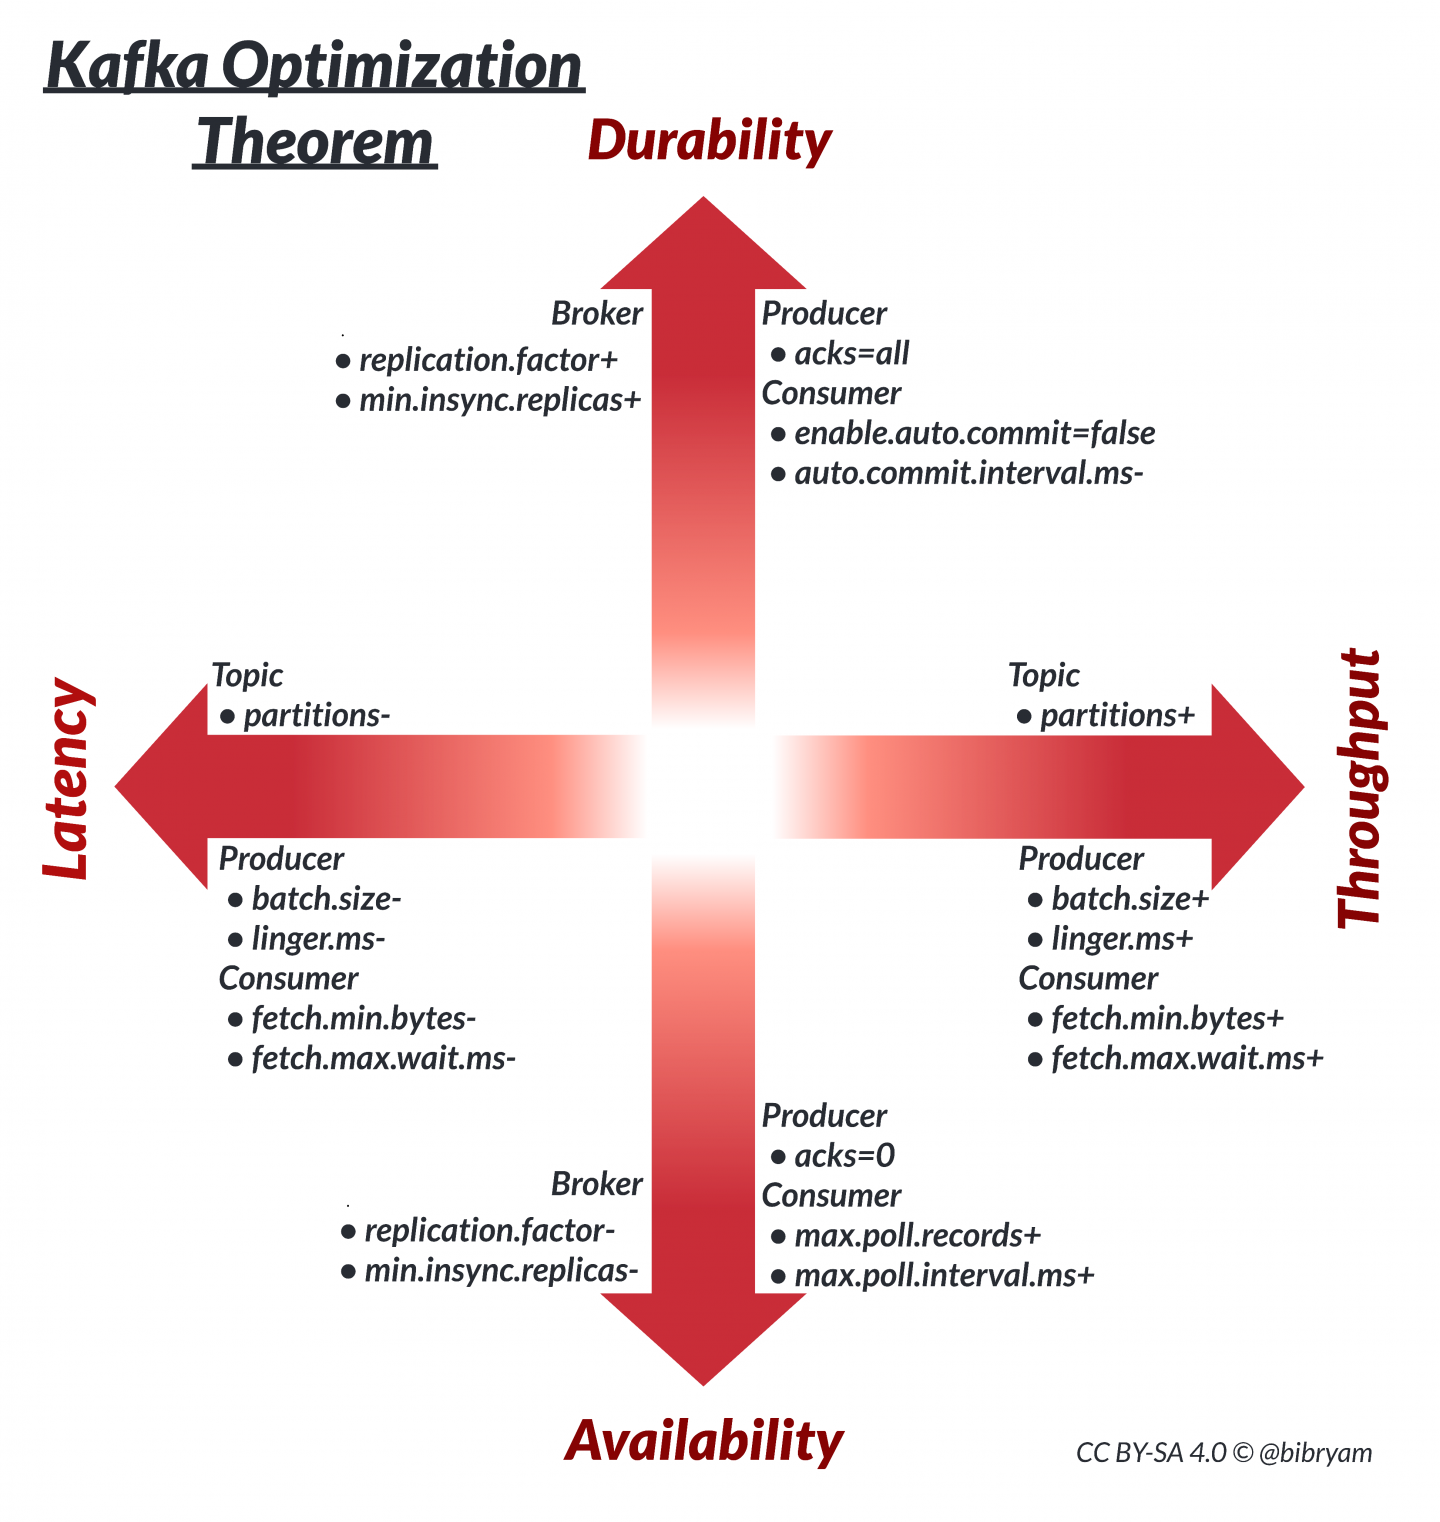 Choices for each parameter determines where a Kafka application stands on the axes defined in Figure 1.